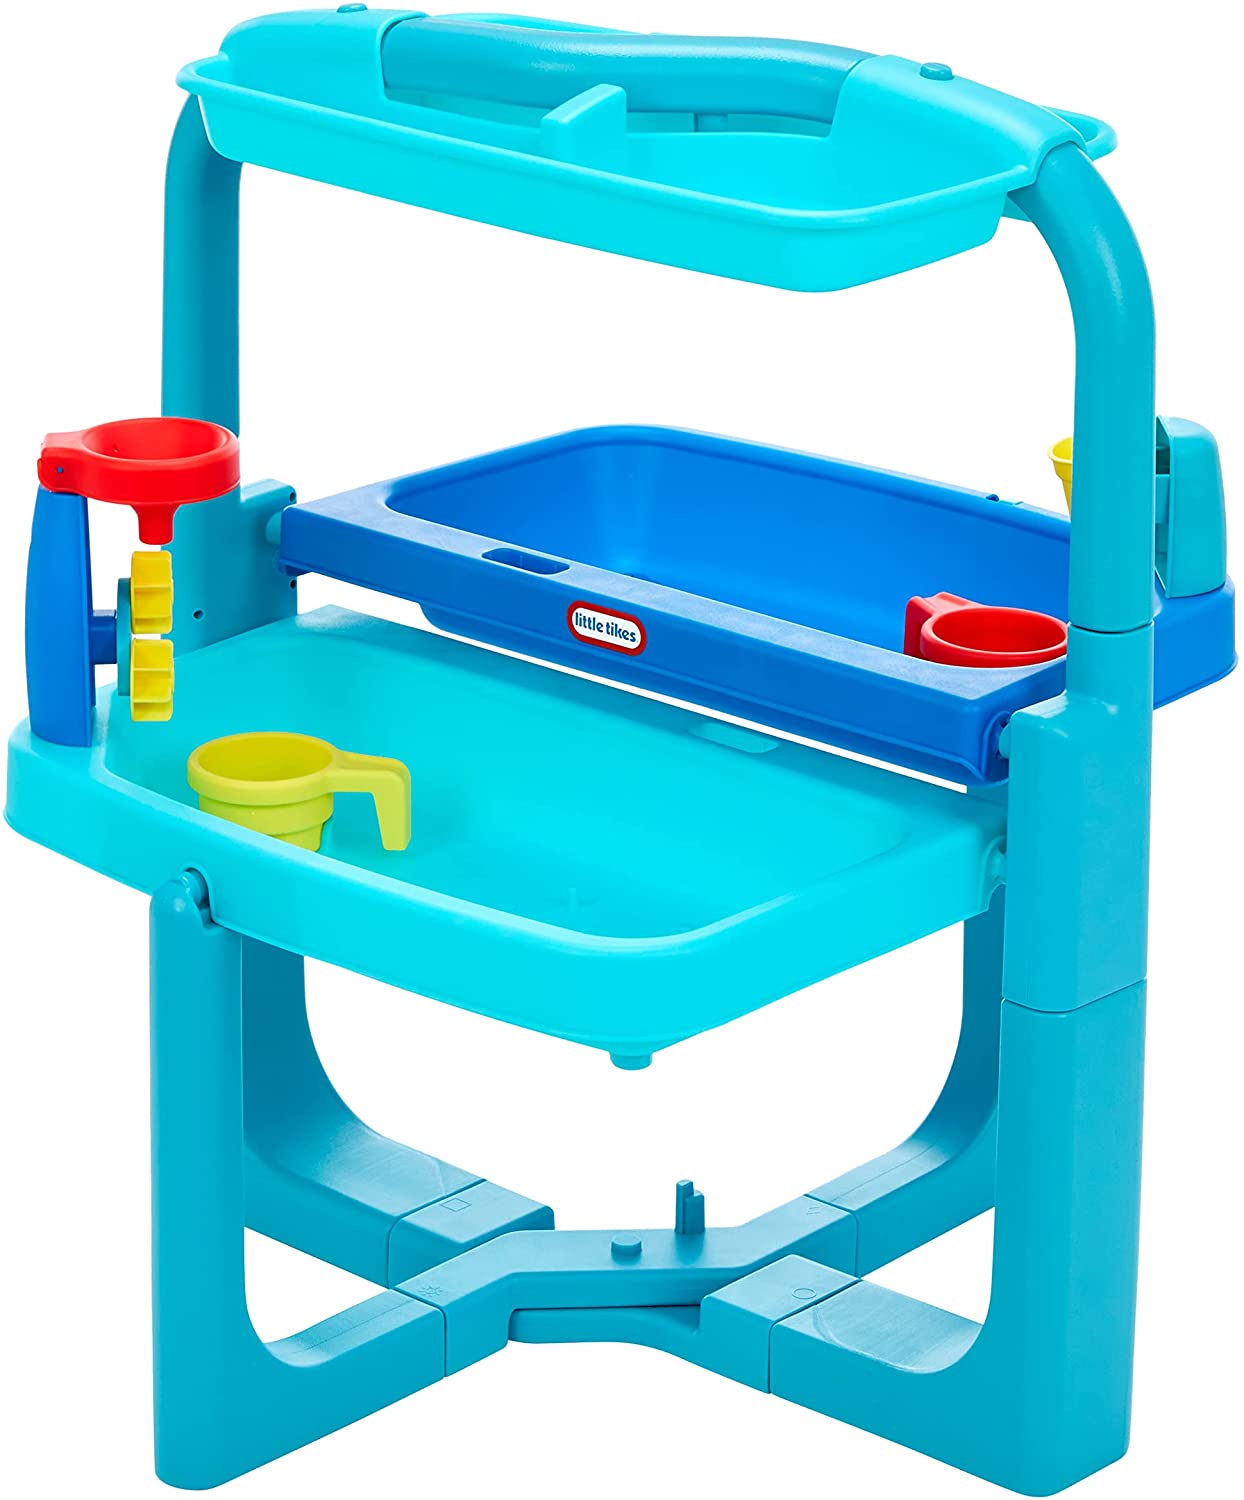 Little Tikes Outdoor Folding Water Play Table